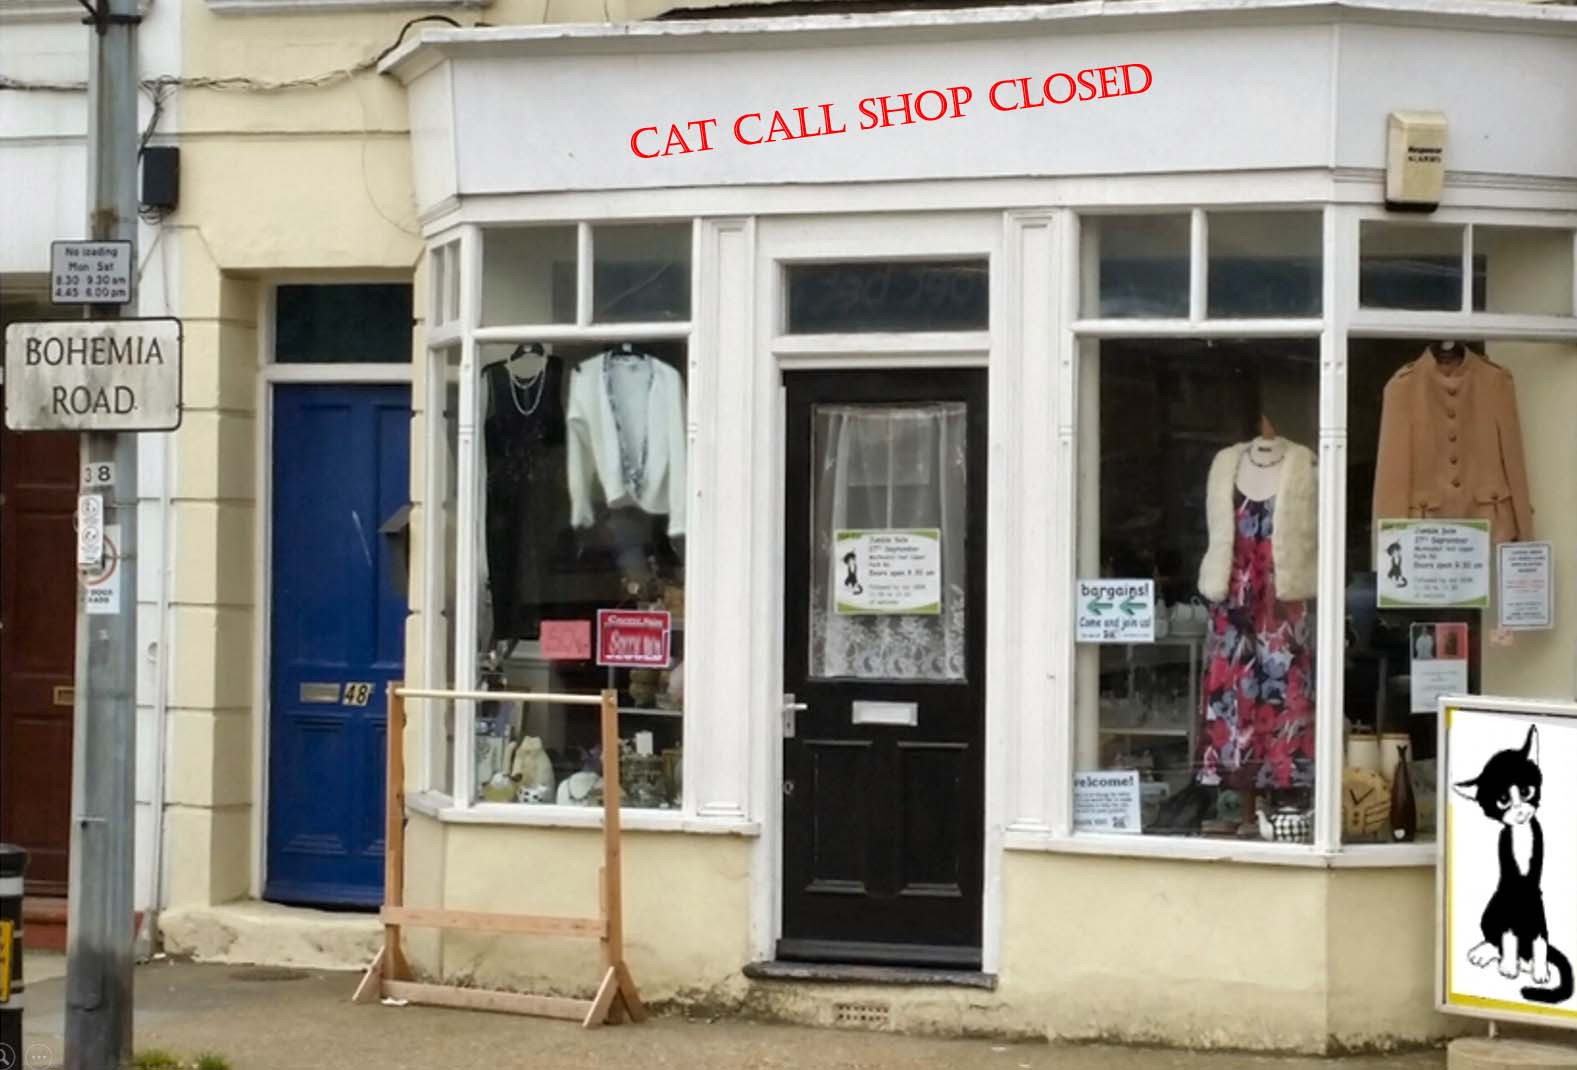 CV19 Has Closed Our Cat Call Charity Shop